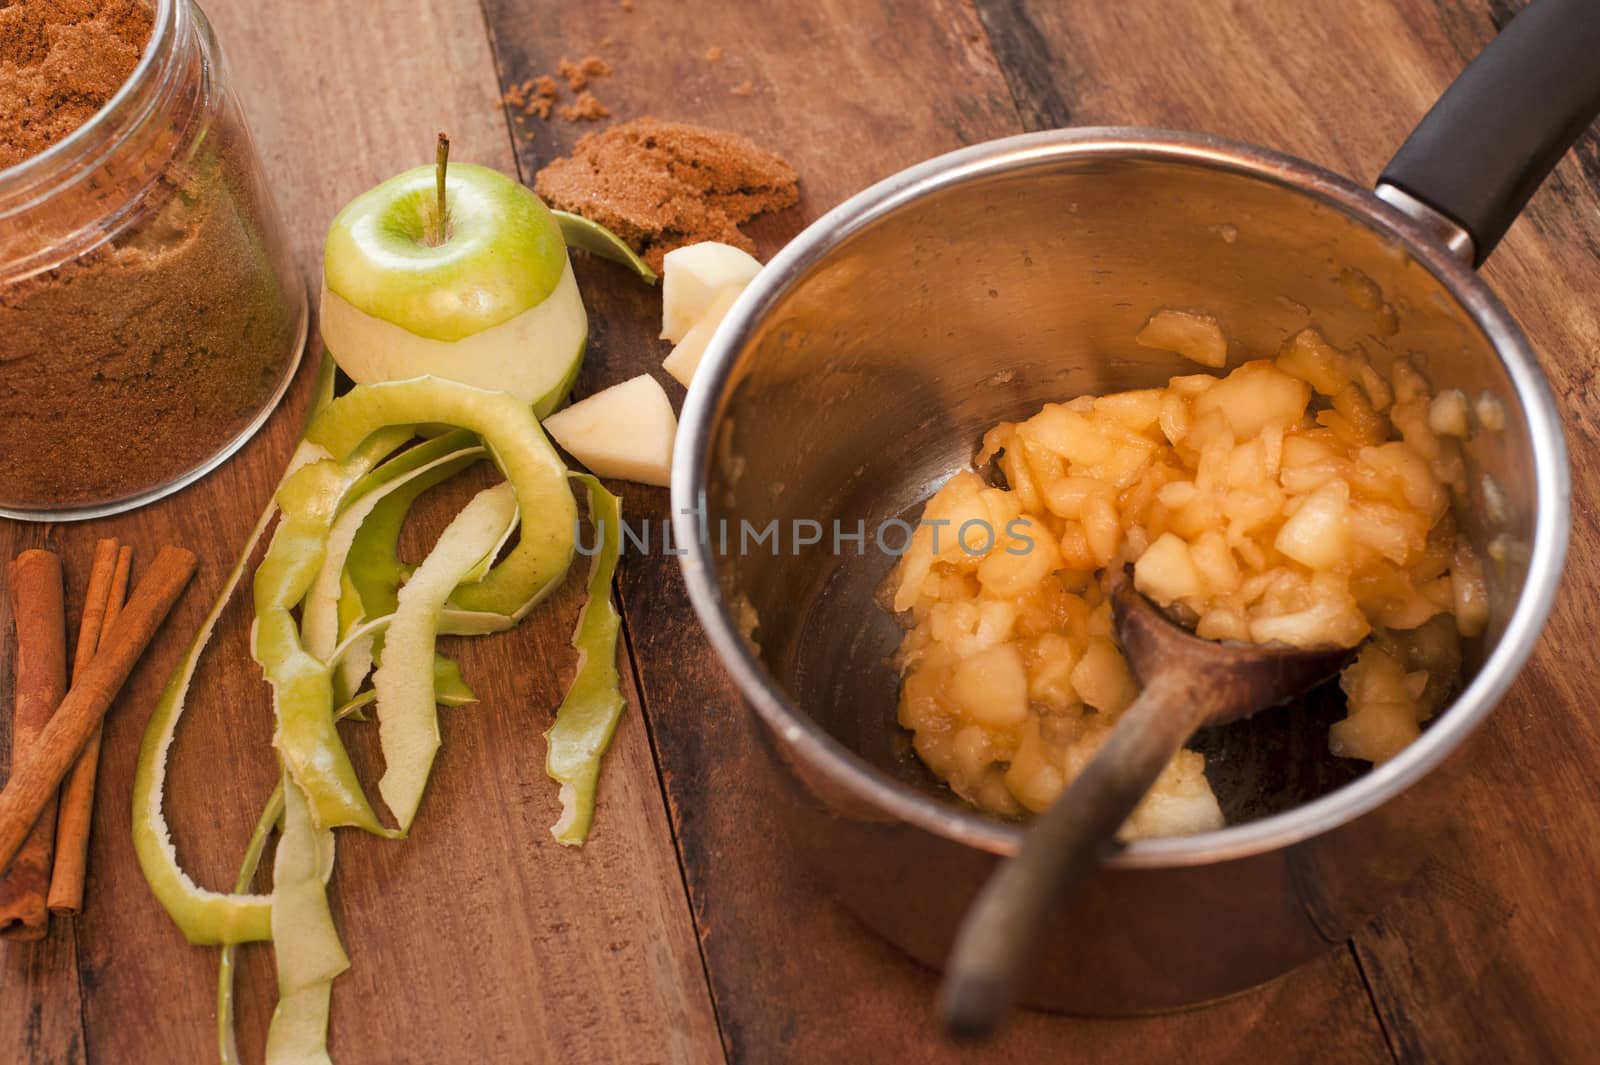 Pieces of apple in metal pan with wooden spoon and apple peeled on table, next to jar of cinnamon, cooking homemade apple sauce